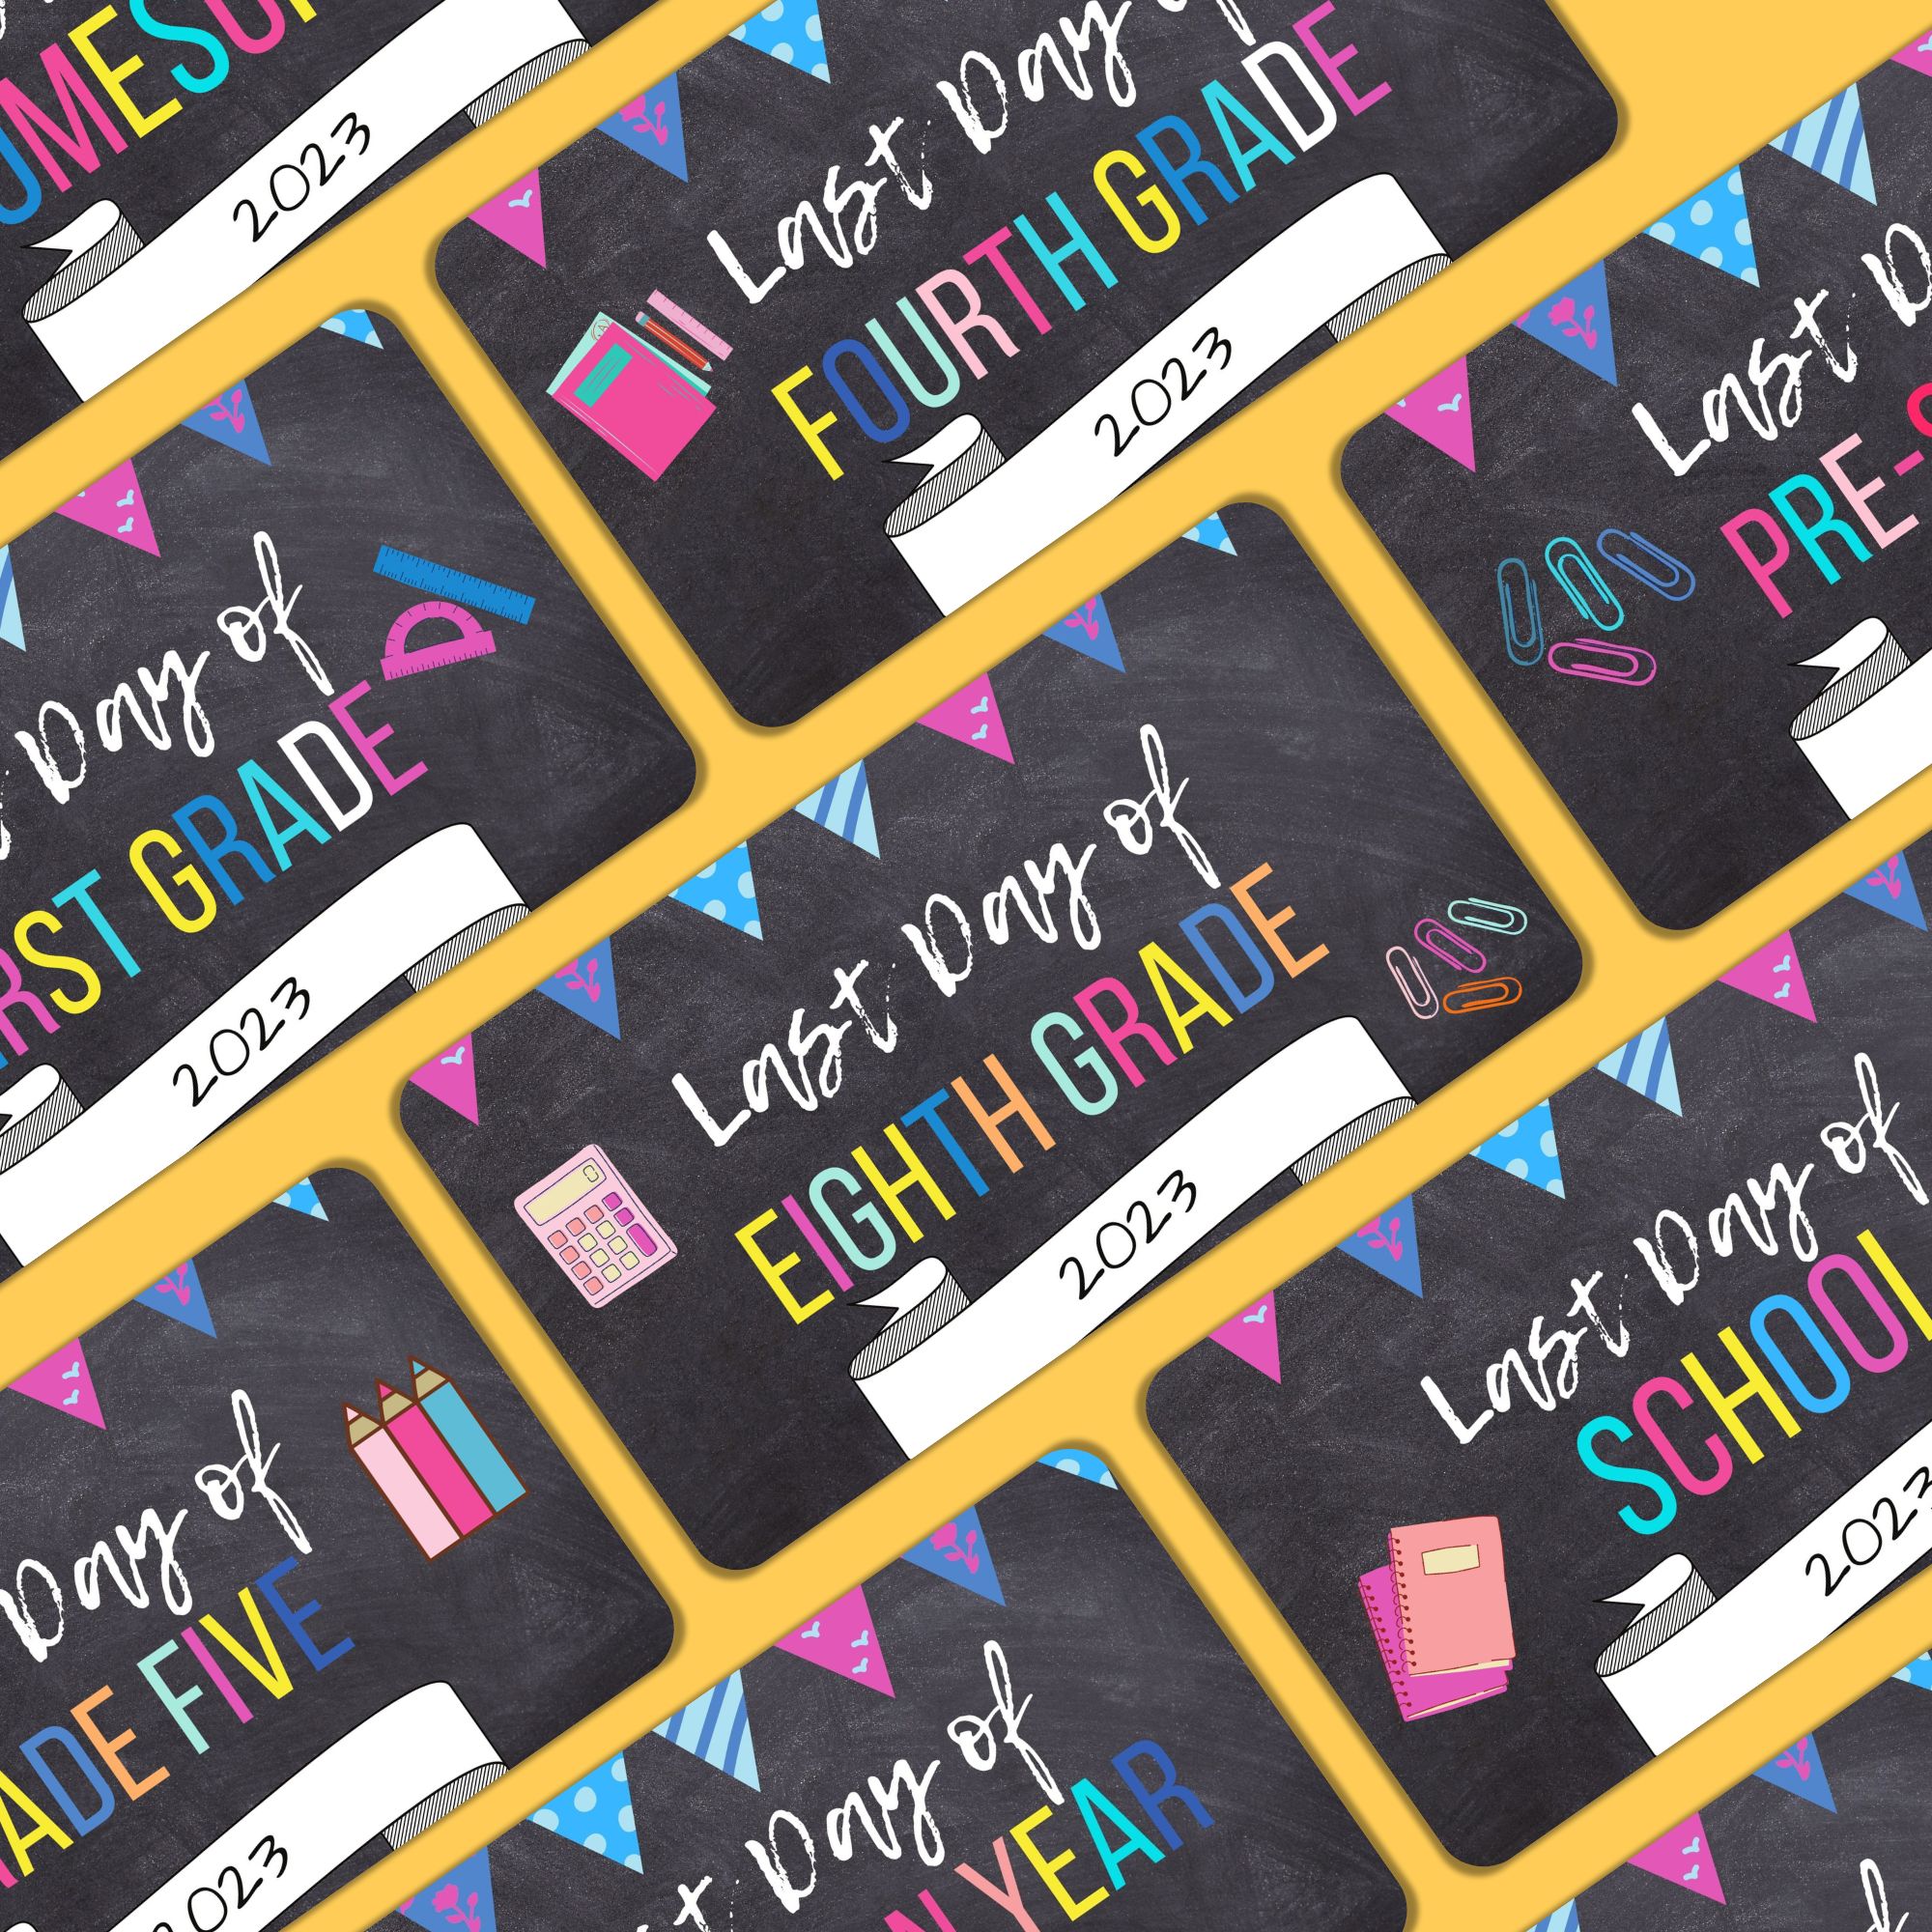 last-day-of-school-chalkboard-signs-2023-free-printable-pdfs